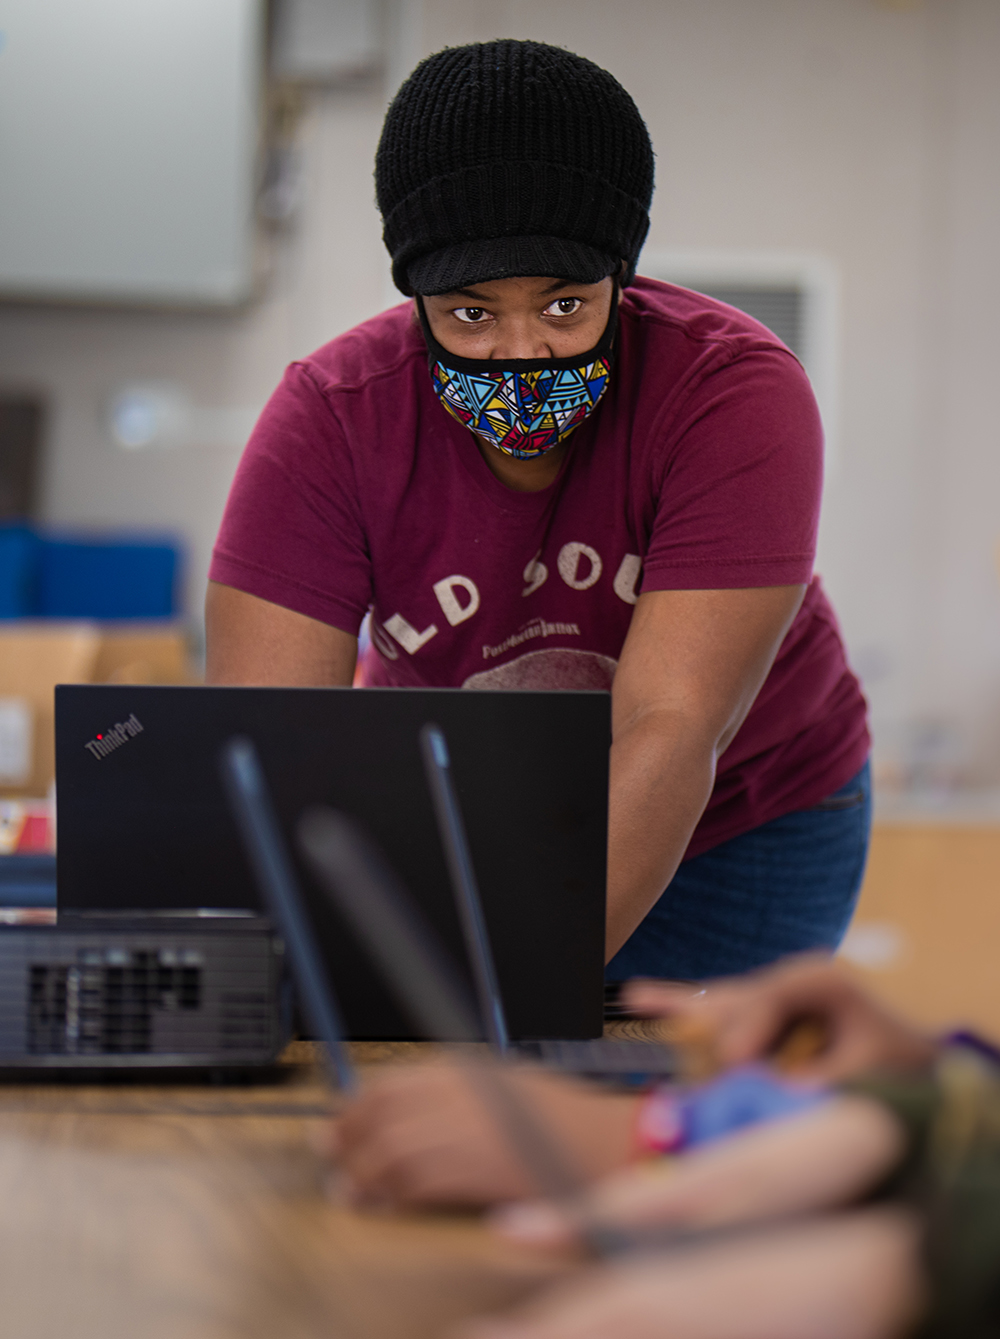 Teacher in mask with computer in front of her